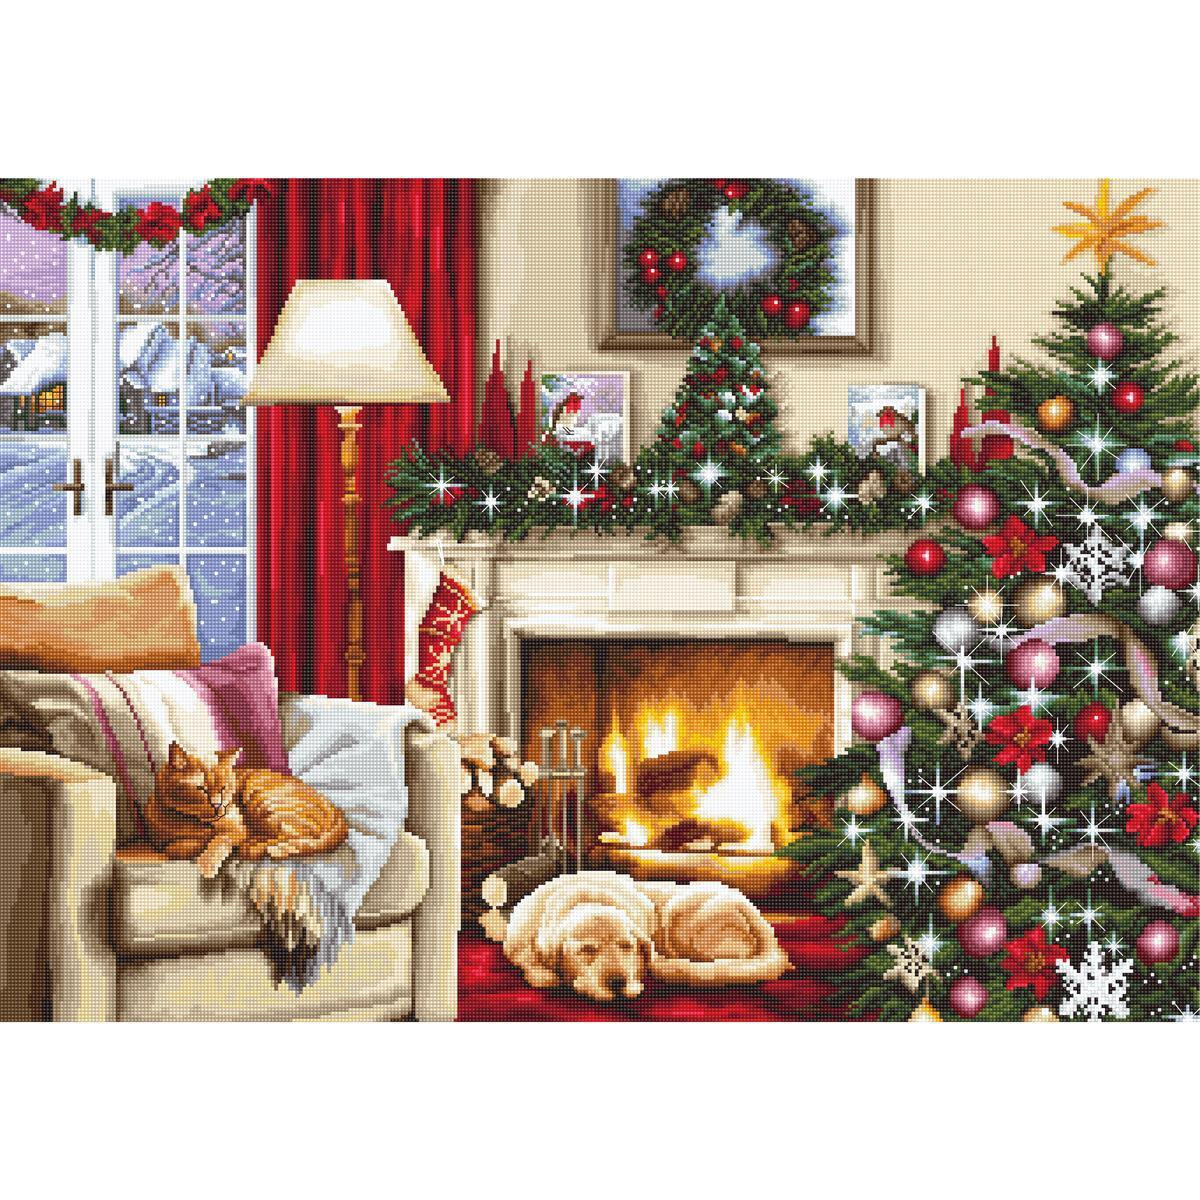 A cozy Christmas scene with a living room with a...